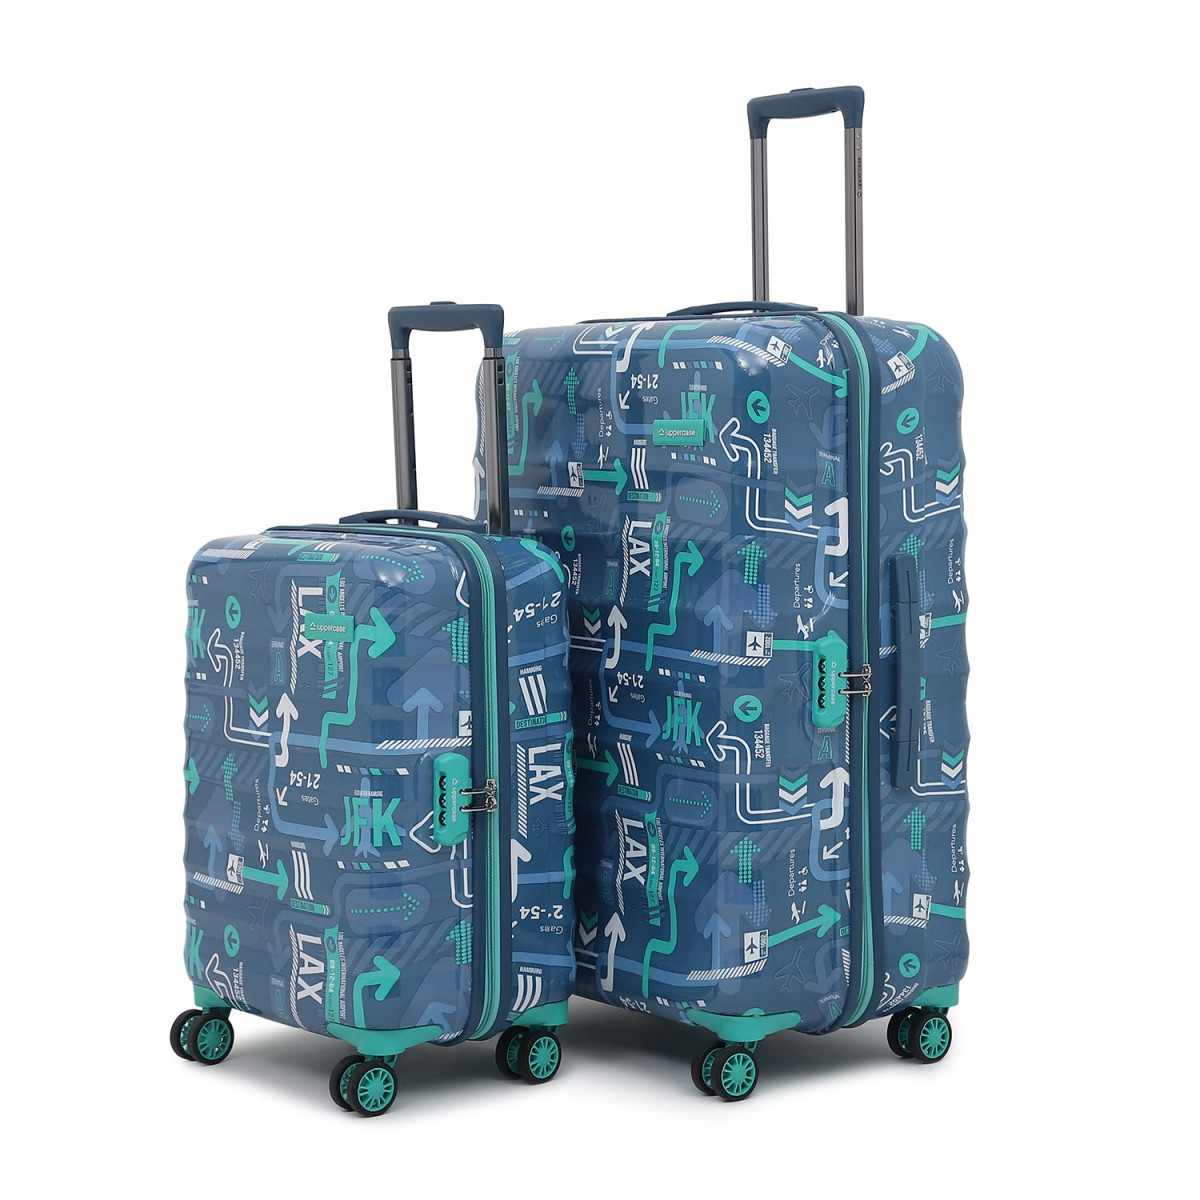 uppercase Jfk Trolley Bag Set Of 2 SL Cabin  Check-In Spinner Luggage Hardsided Polycarbonate Printed Luggage Combination Lock 8 Wheel Suitcase 2000 Days Warranty Denim Blue 31 X 53 X 755 Cm